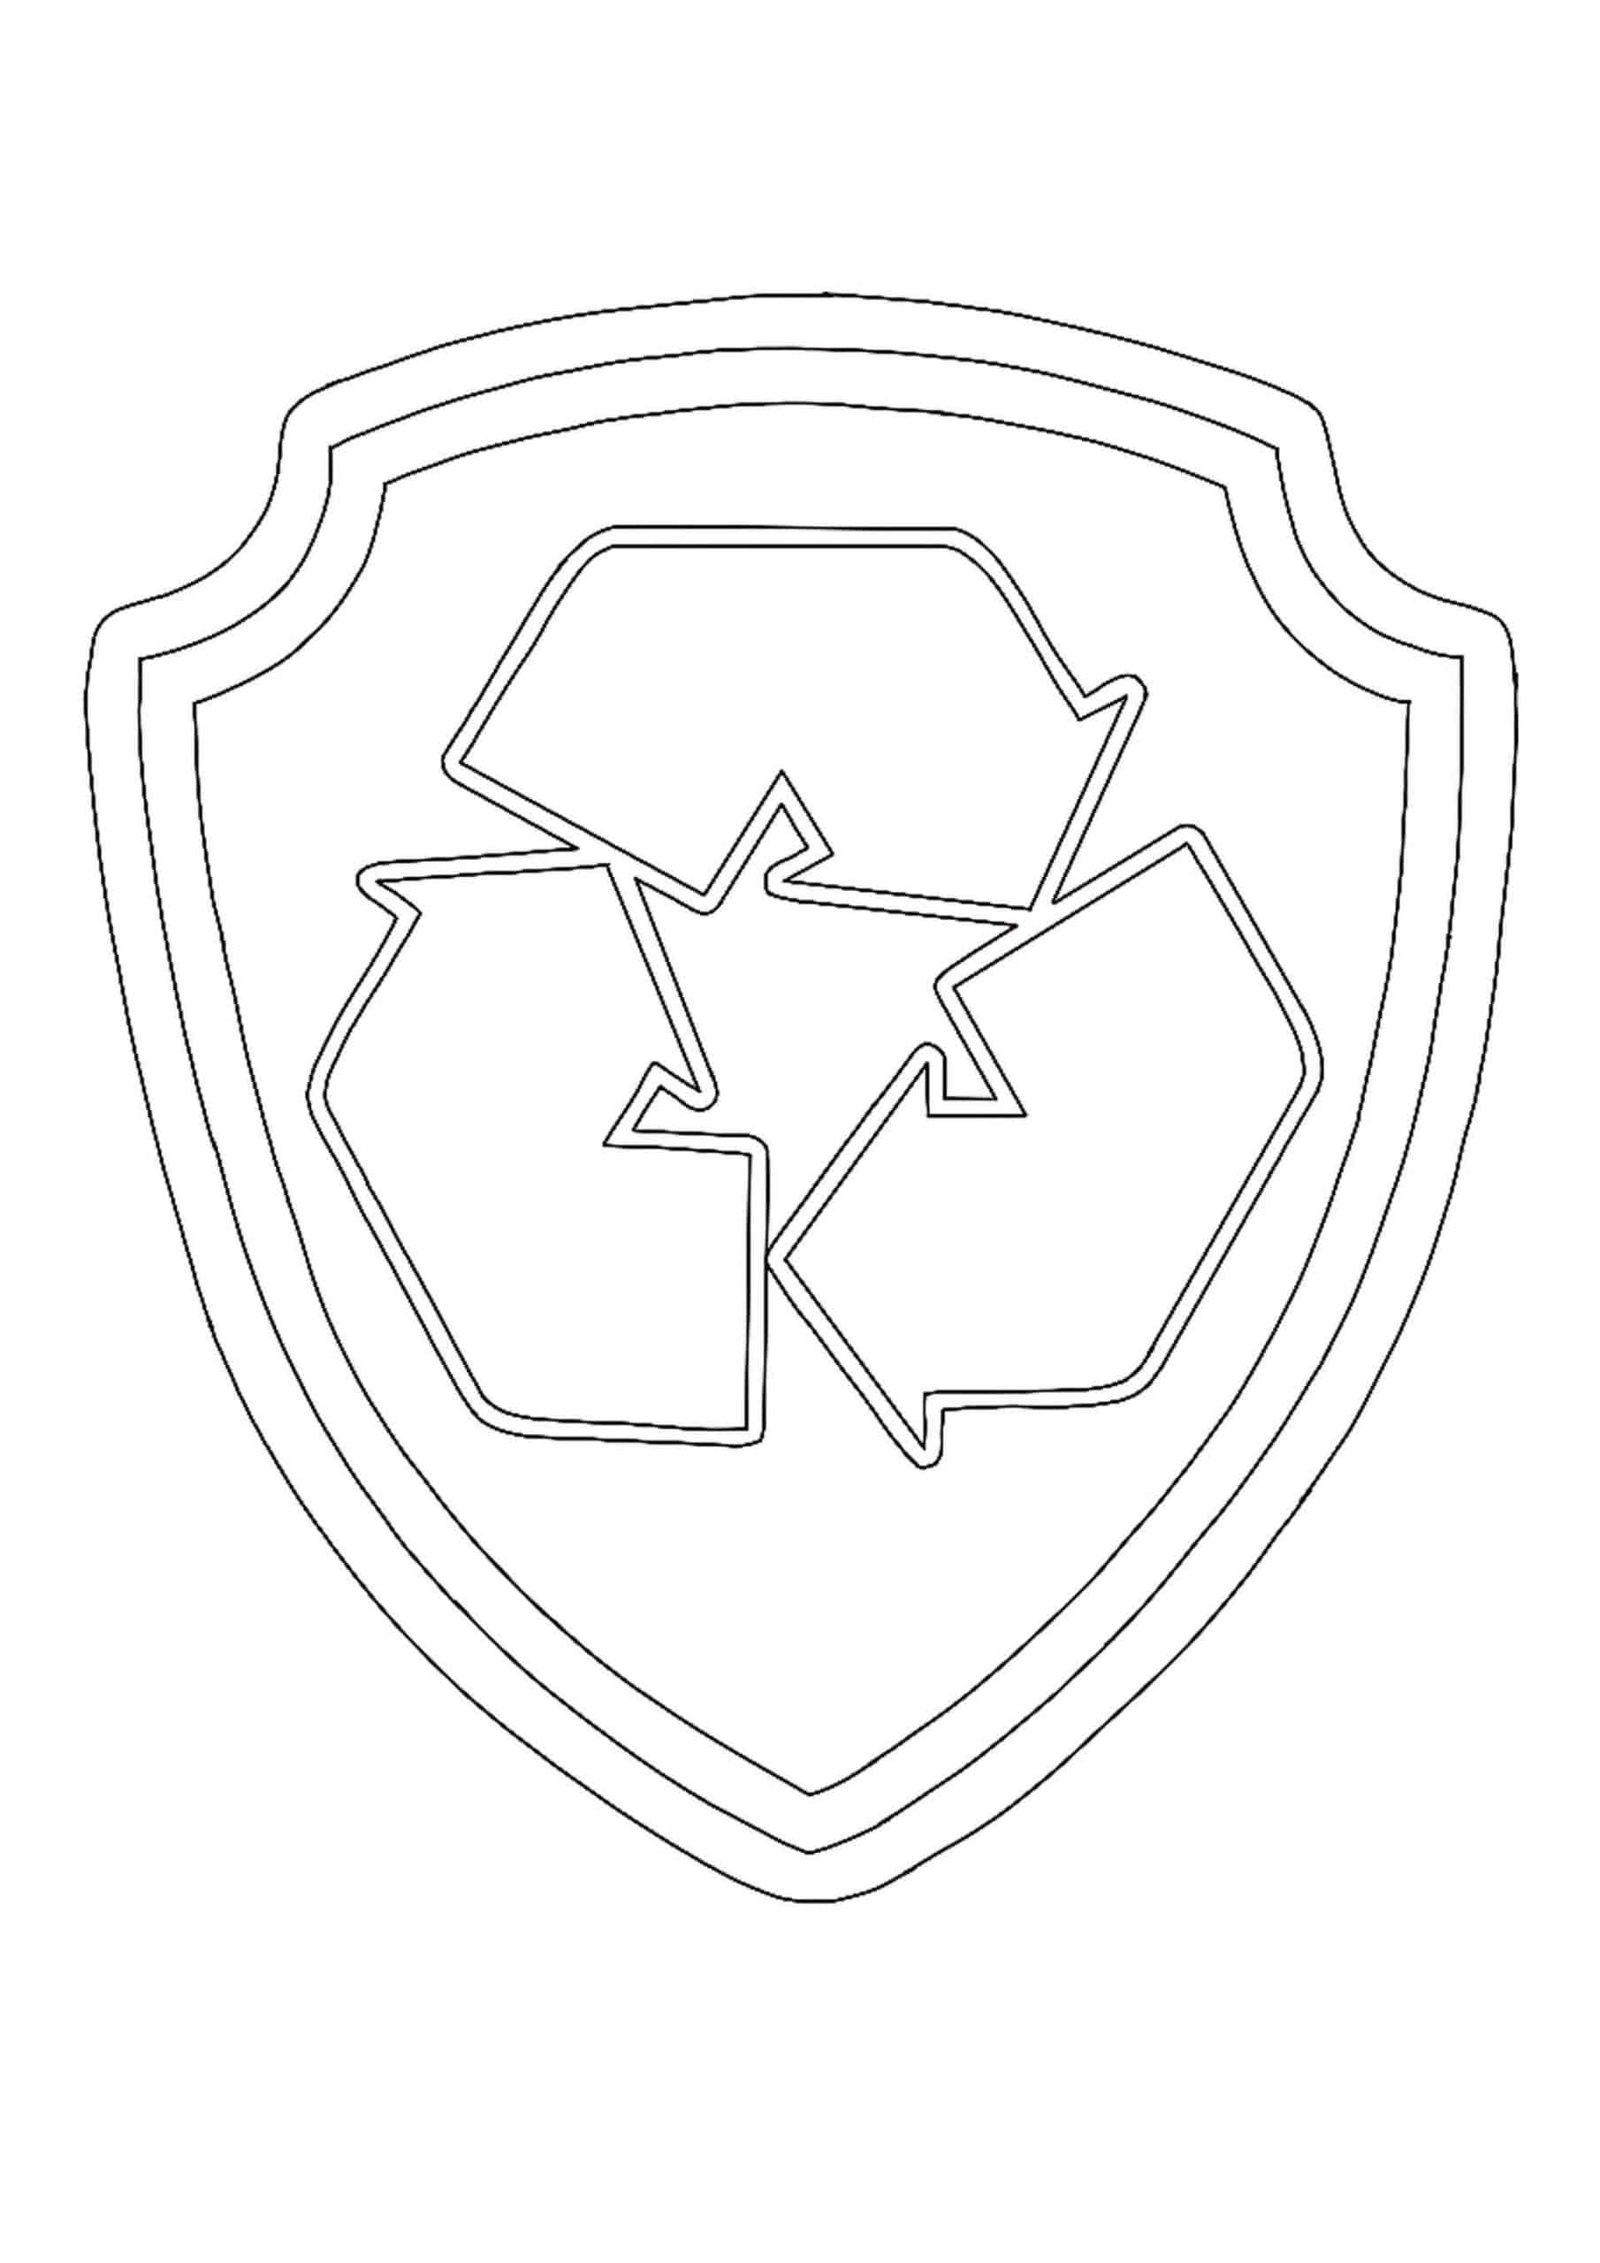 Paw Patrol Rocky Badge coloring page